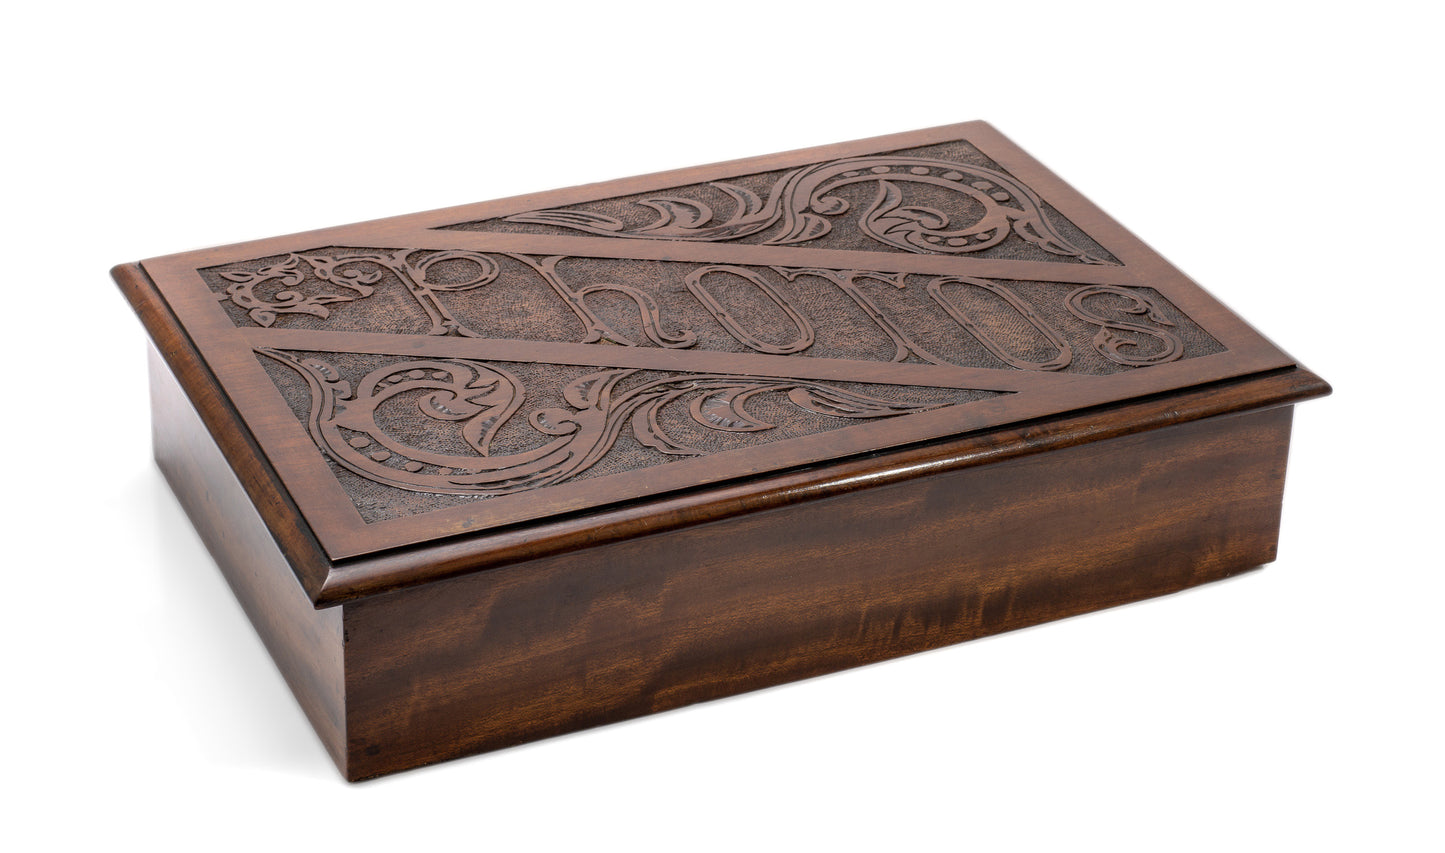 Antique Photo Box In Mahogany Wood With Carved Panel - Victorian/Edwardian c1900 (Code 2148)